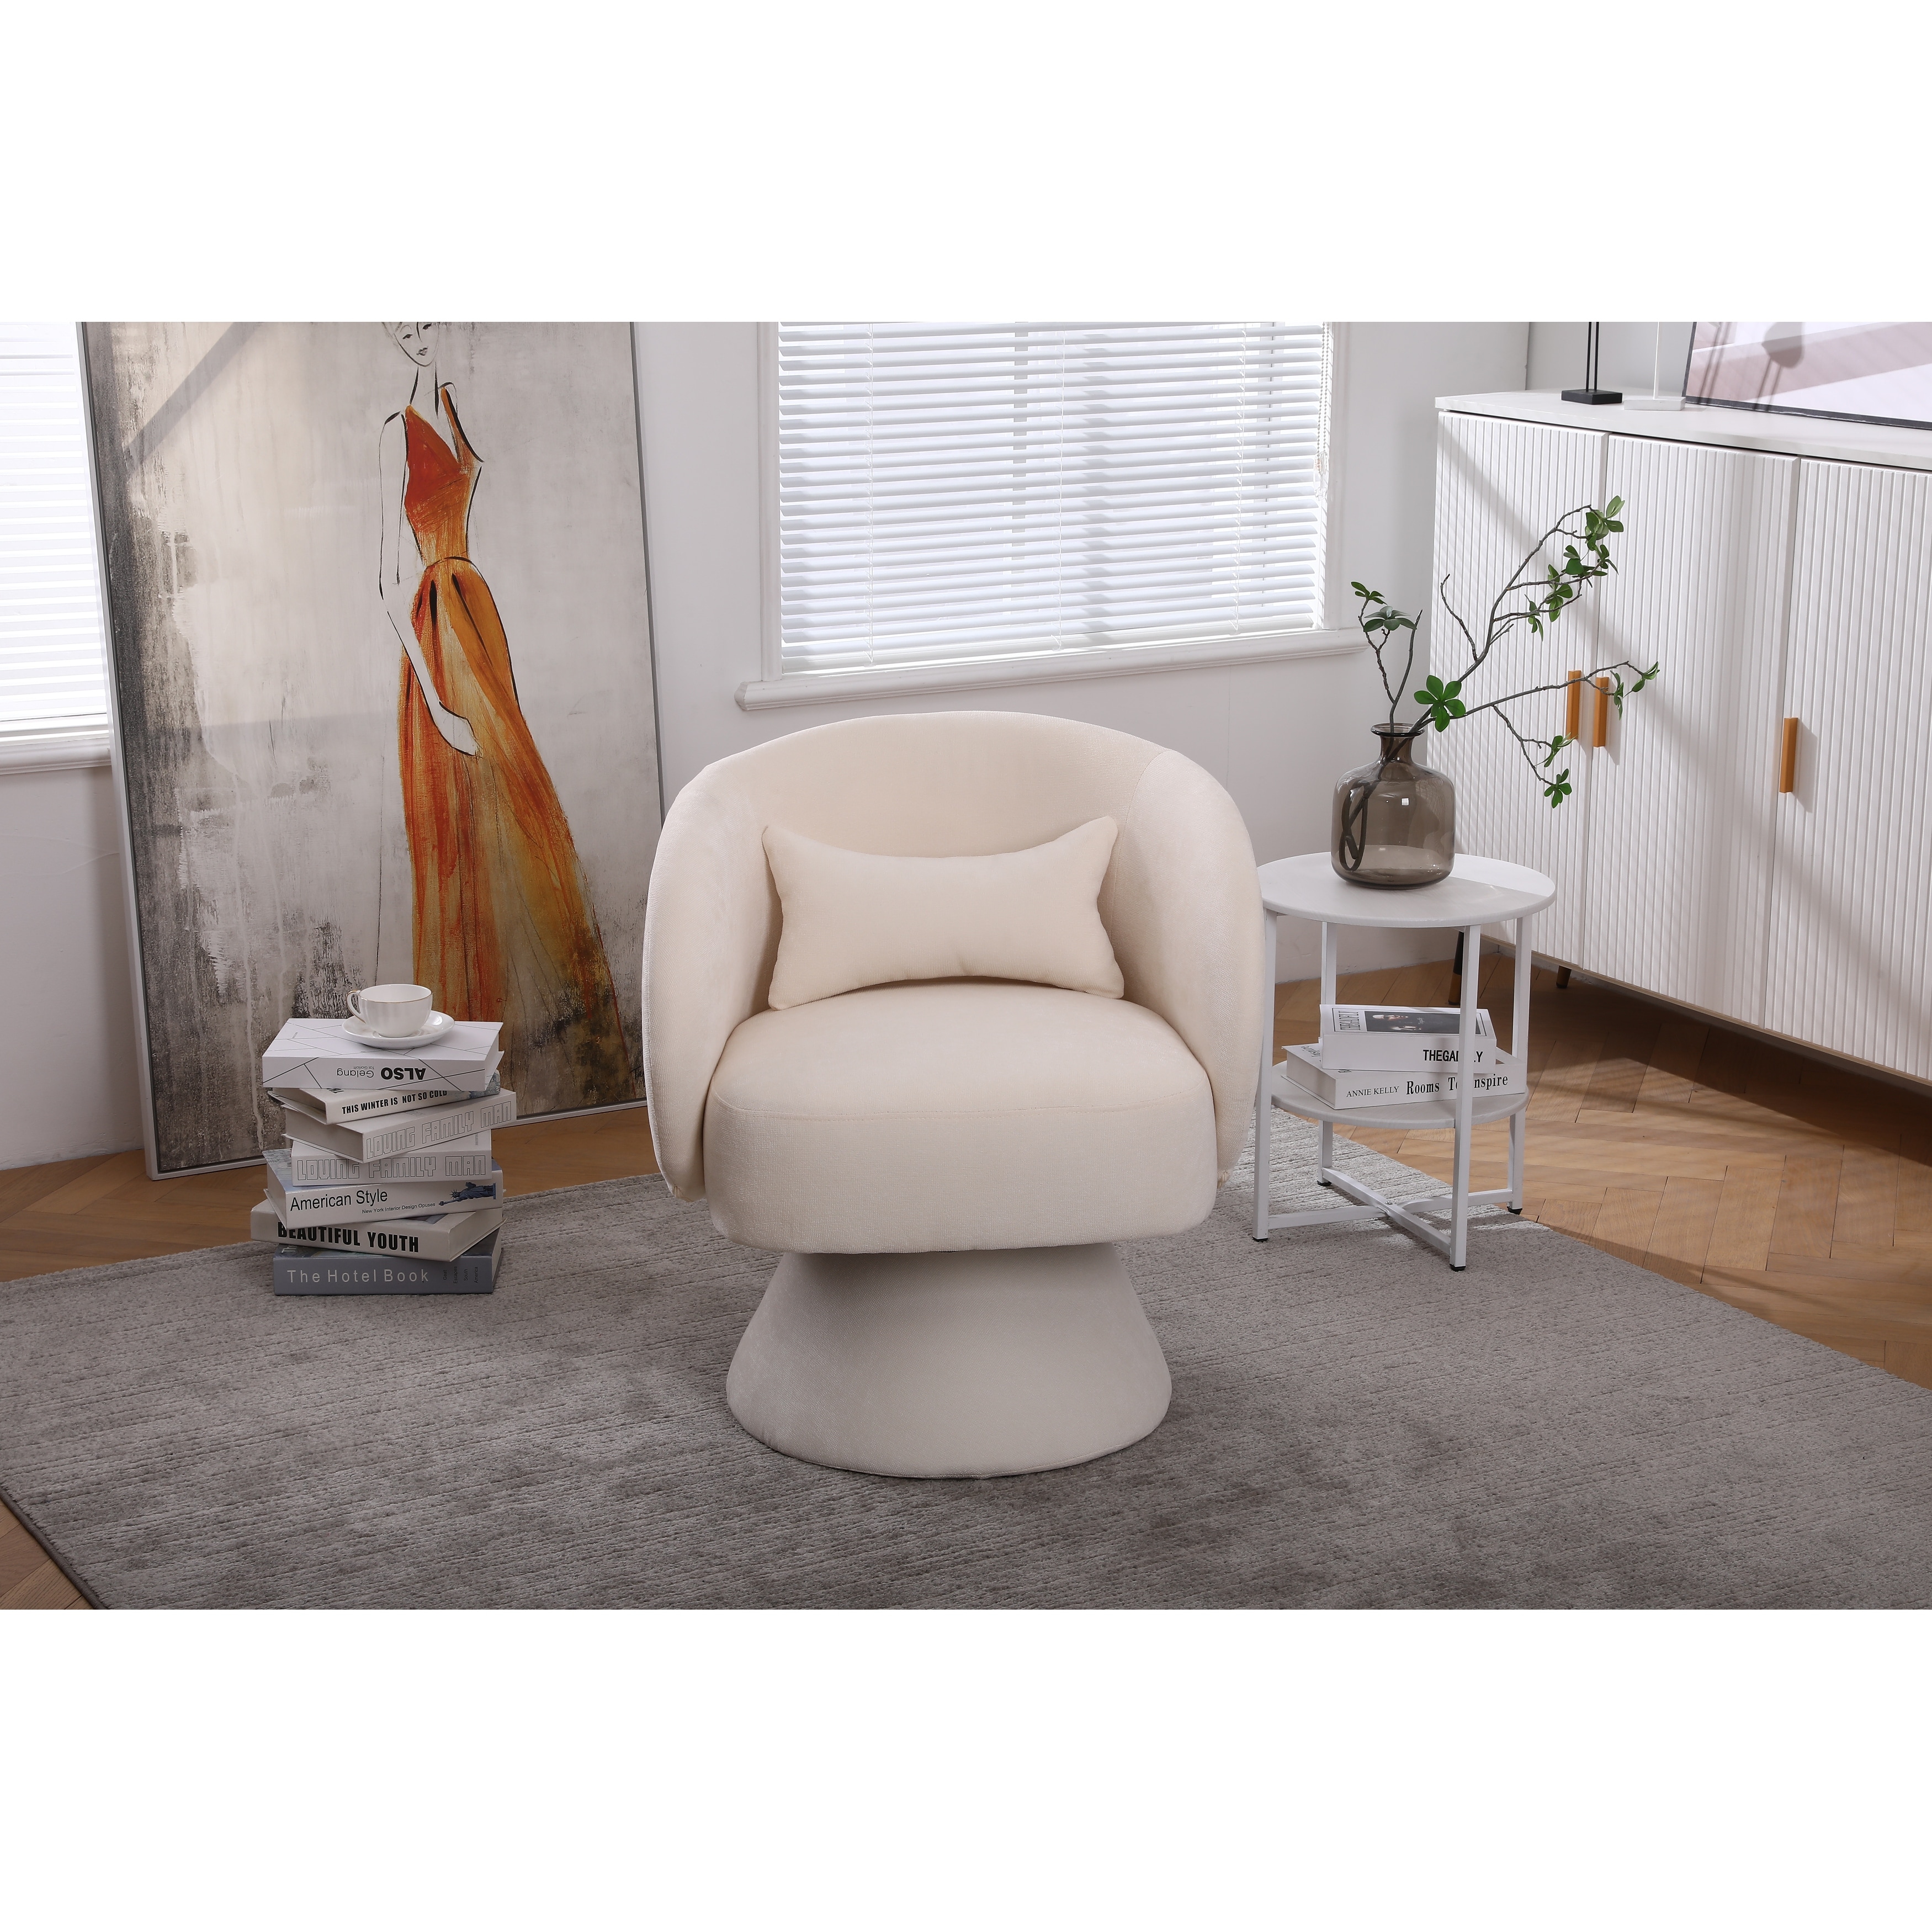 https://ak1.ostkcdn.com/images/products/is/images/direct/64712ae4b2b87f2e23d3e503570db7264d7fbe40/Round-Barrel-Swivel-Chairs-in-Performance-Fabric-with-Small-Pillow%2C-Linen-Accent-Chair-Swivel-Armchair-for-Living-Room-Bedroom.jpg